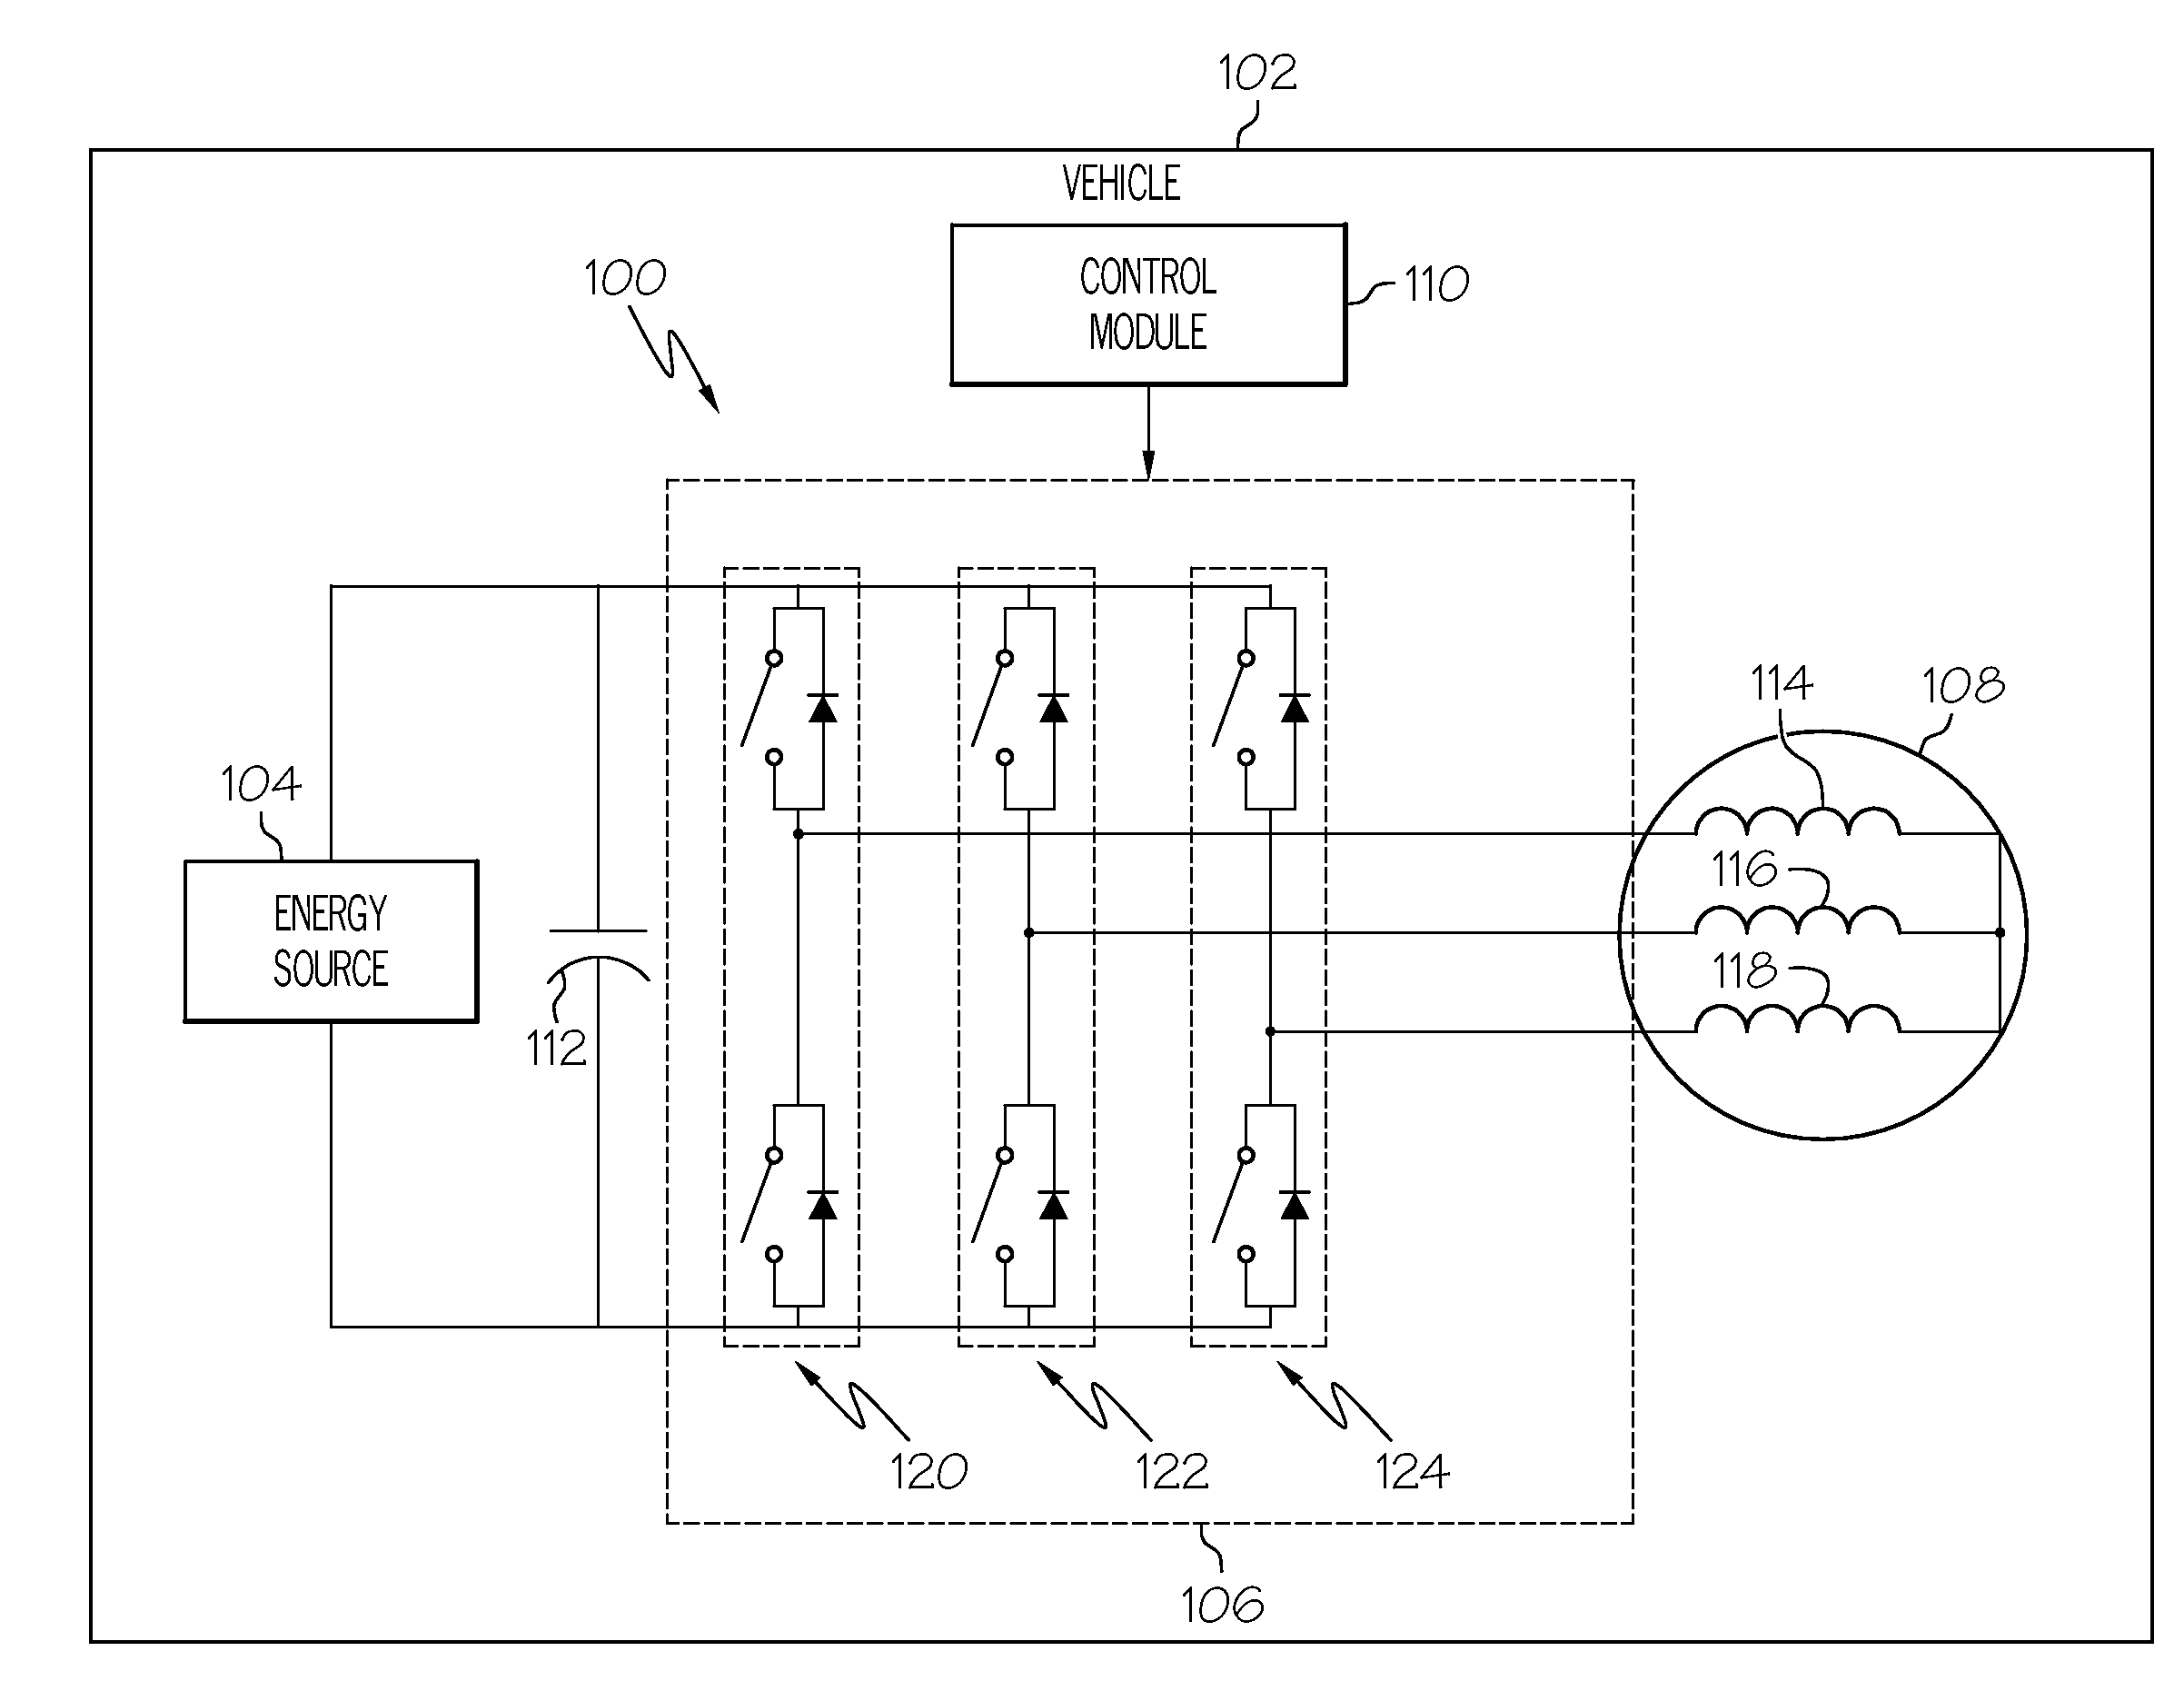 Power supply topology for a multi-processor controller in an electric traction system